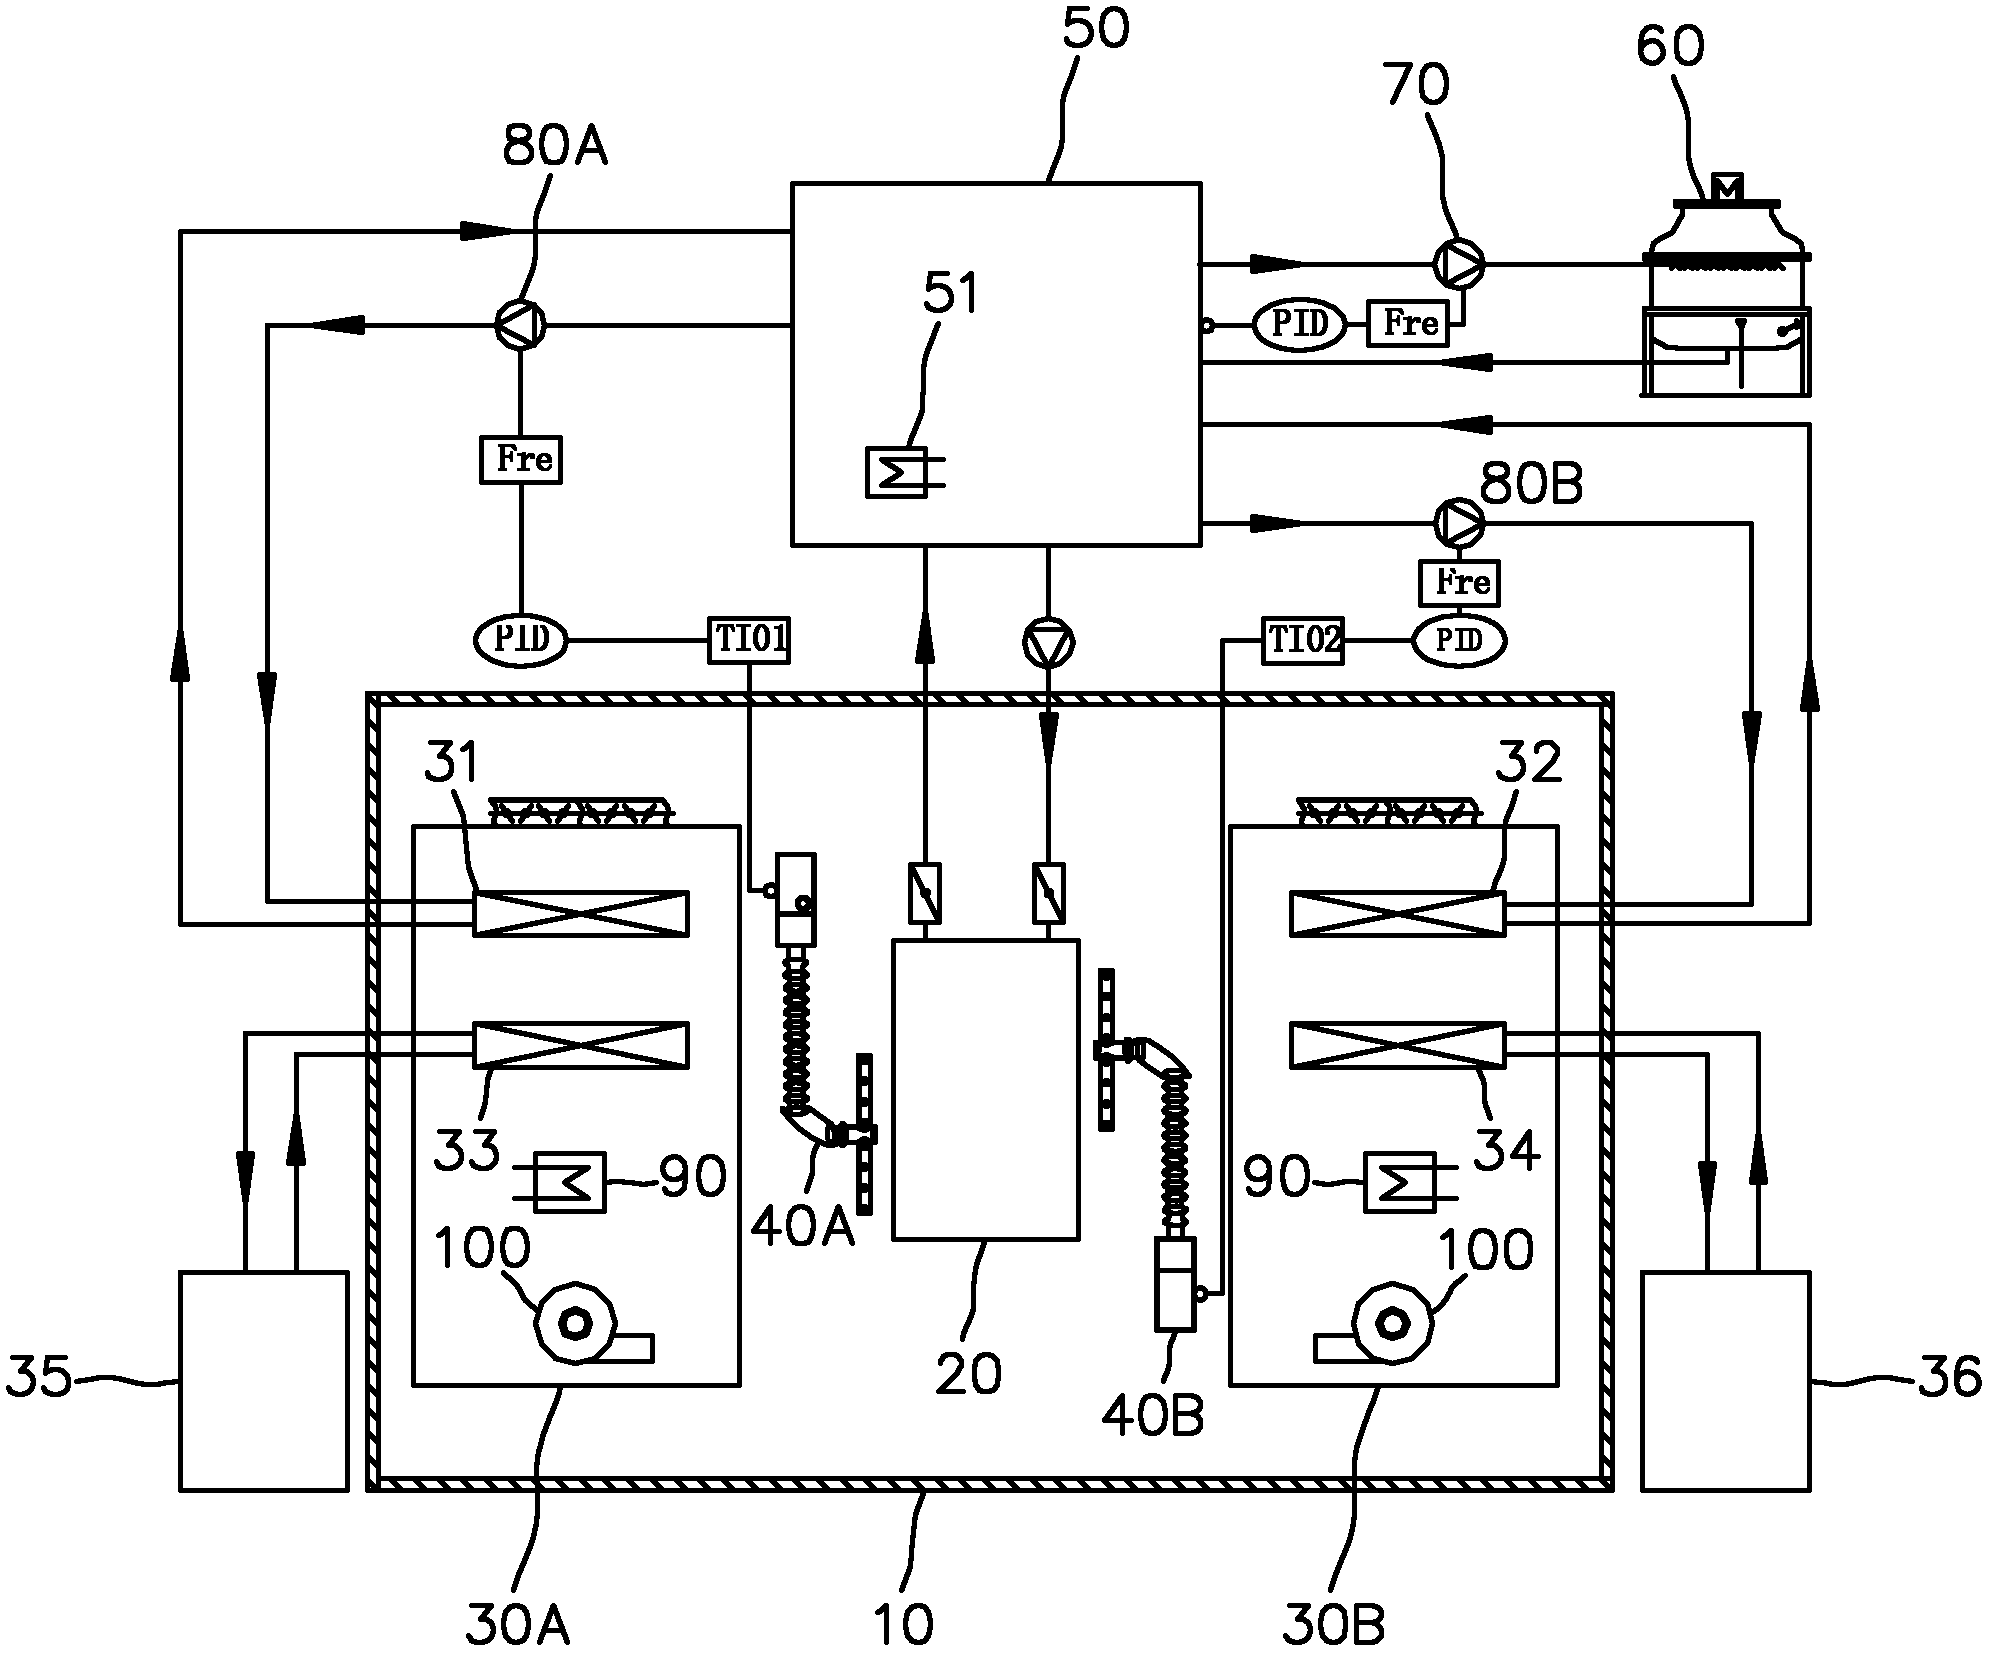 Air-cooling cold (hot) water unit experiment device with surface-cooling coil pipe regulation function